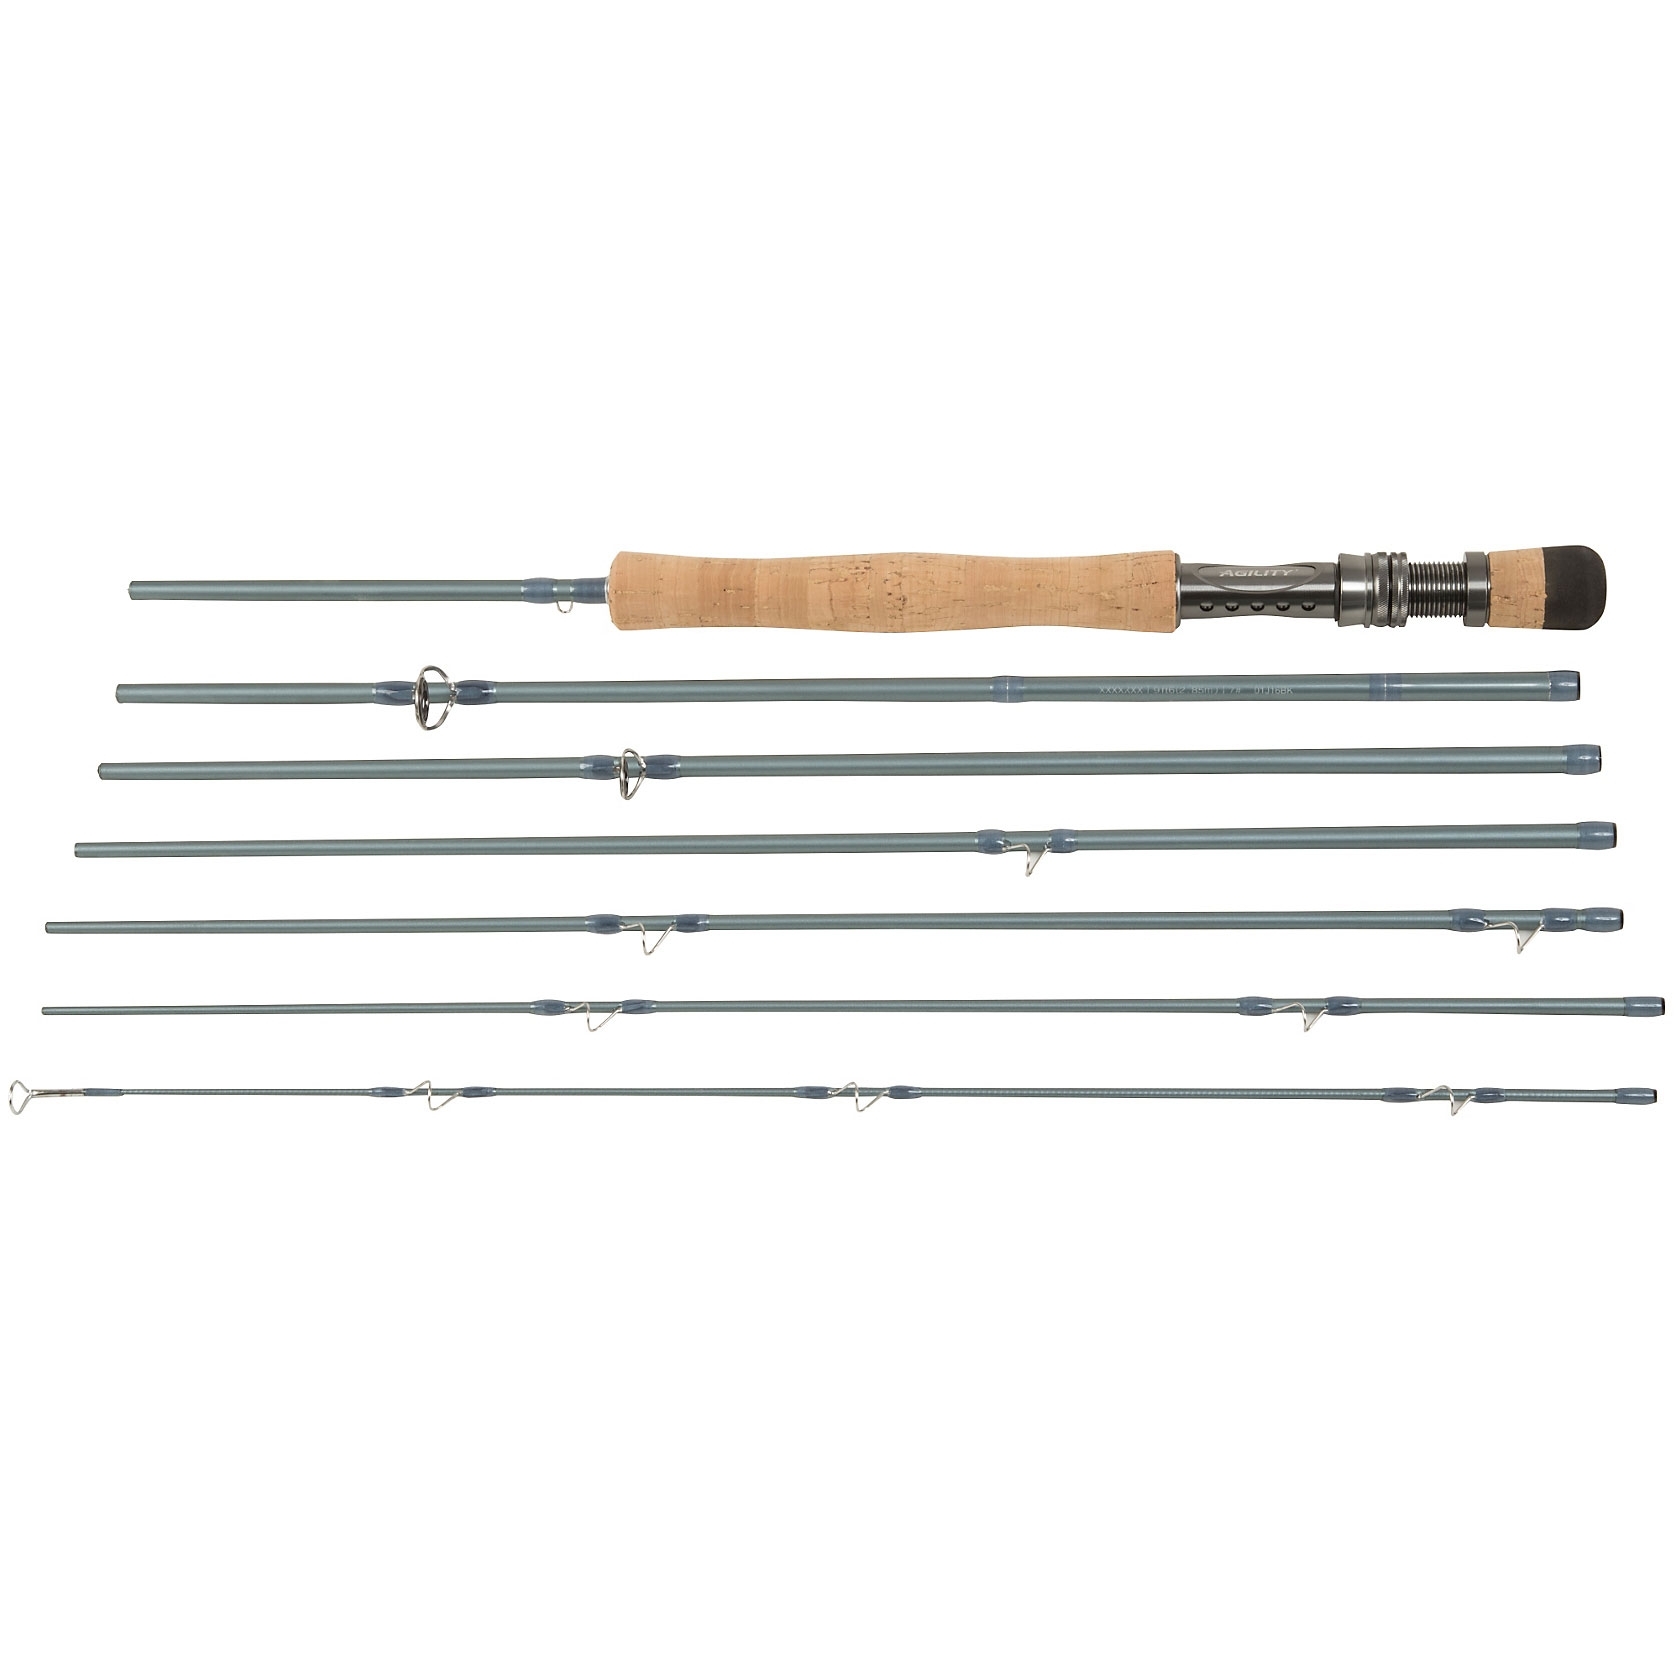 Shakespeare Agility 2 EXP Fly Rod - Trout Travel Fly Fishing Rods